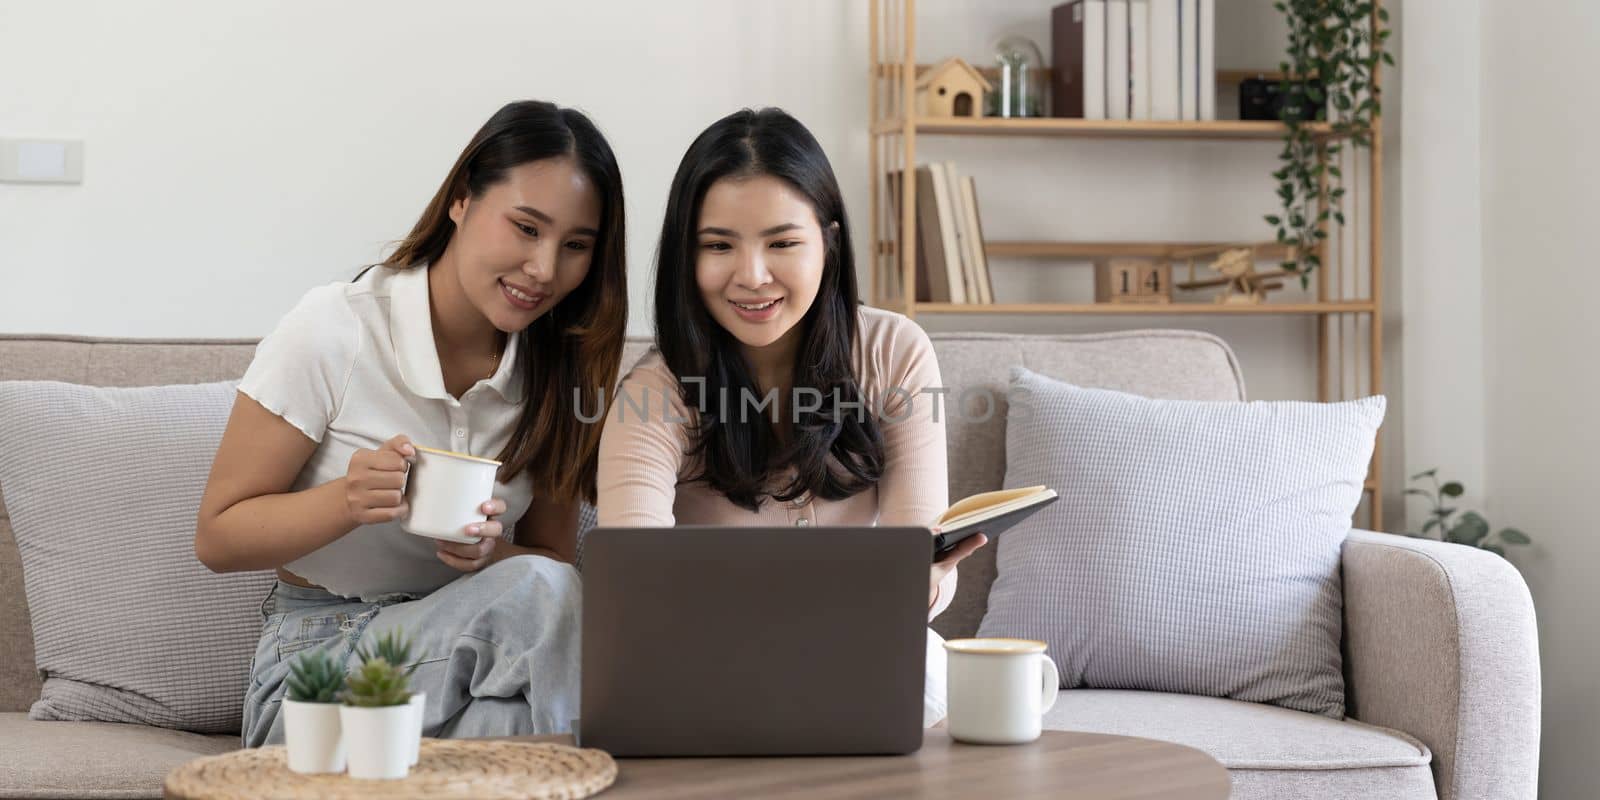 Happy young asian women LGBT lesbian happy couple sitting on sofa using laptop a computer in living room at home. LGBT lesbian couple together.